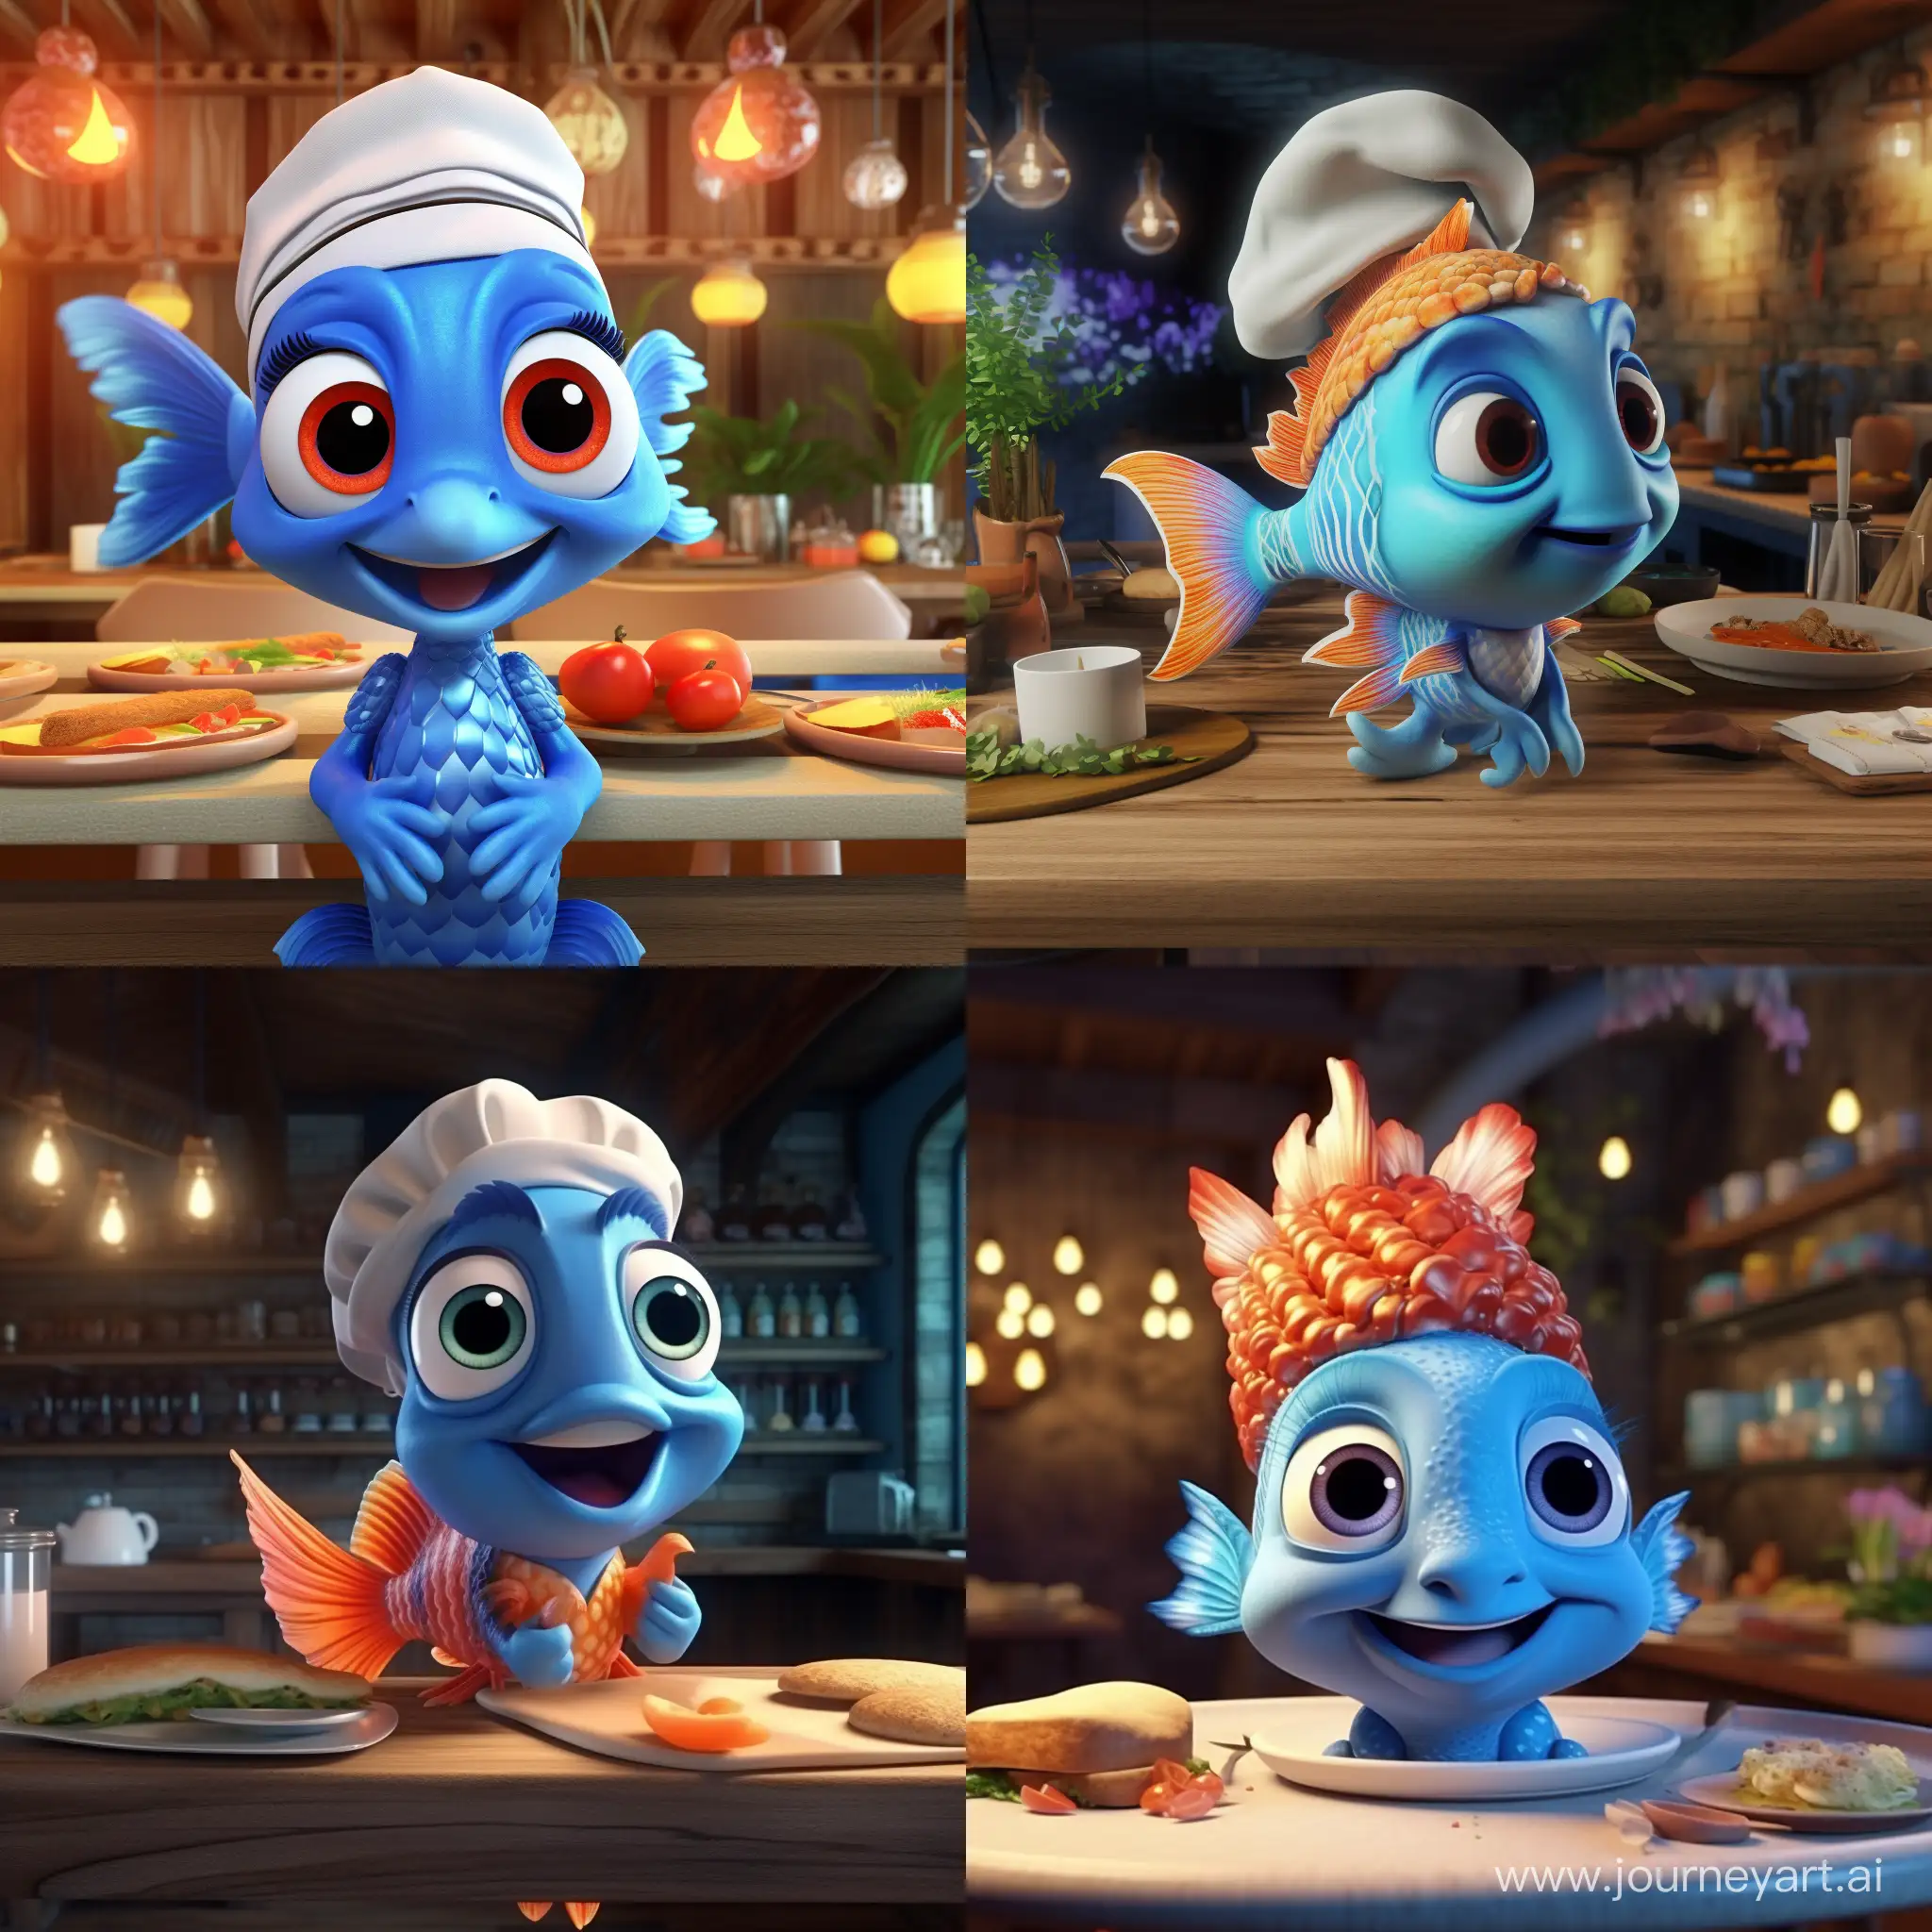 Playful-Blue-Fish-Chef-Creating-Sushi-in-a-Vibrant-3D-Animated-Restaurant-Scene